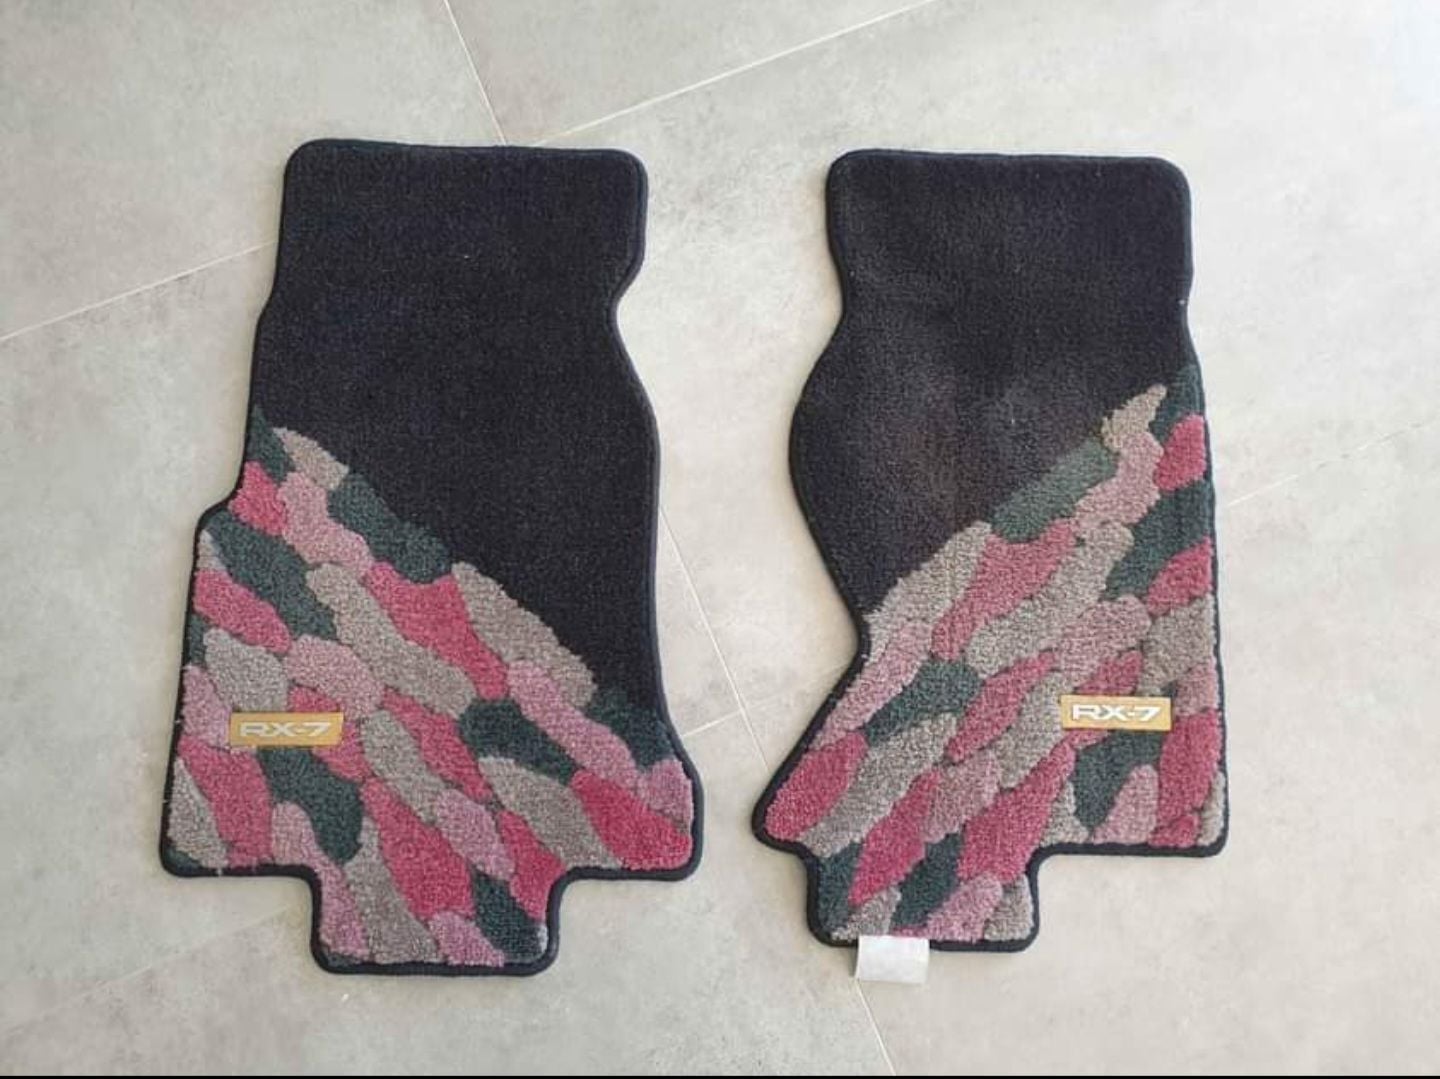 Interior/Upholstery - ISO of JDM floor mats - Used - 0  All Models - Indianapolis, IN 46077, United States